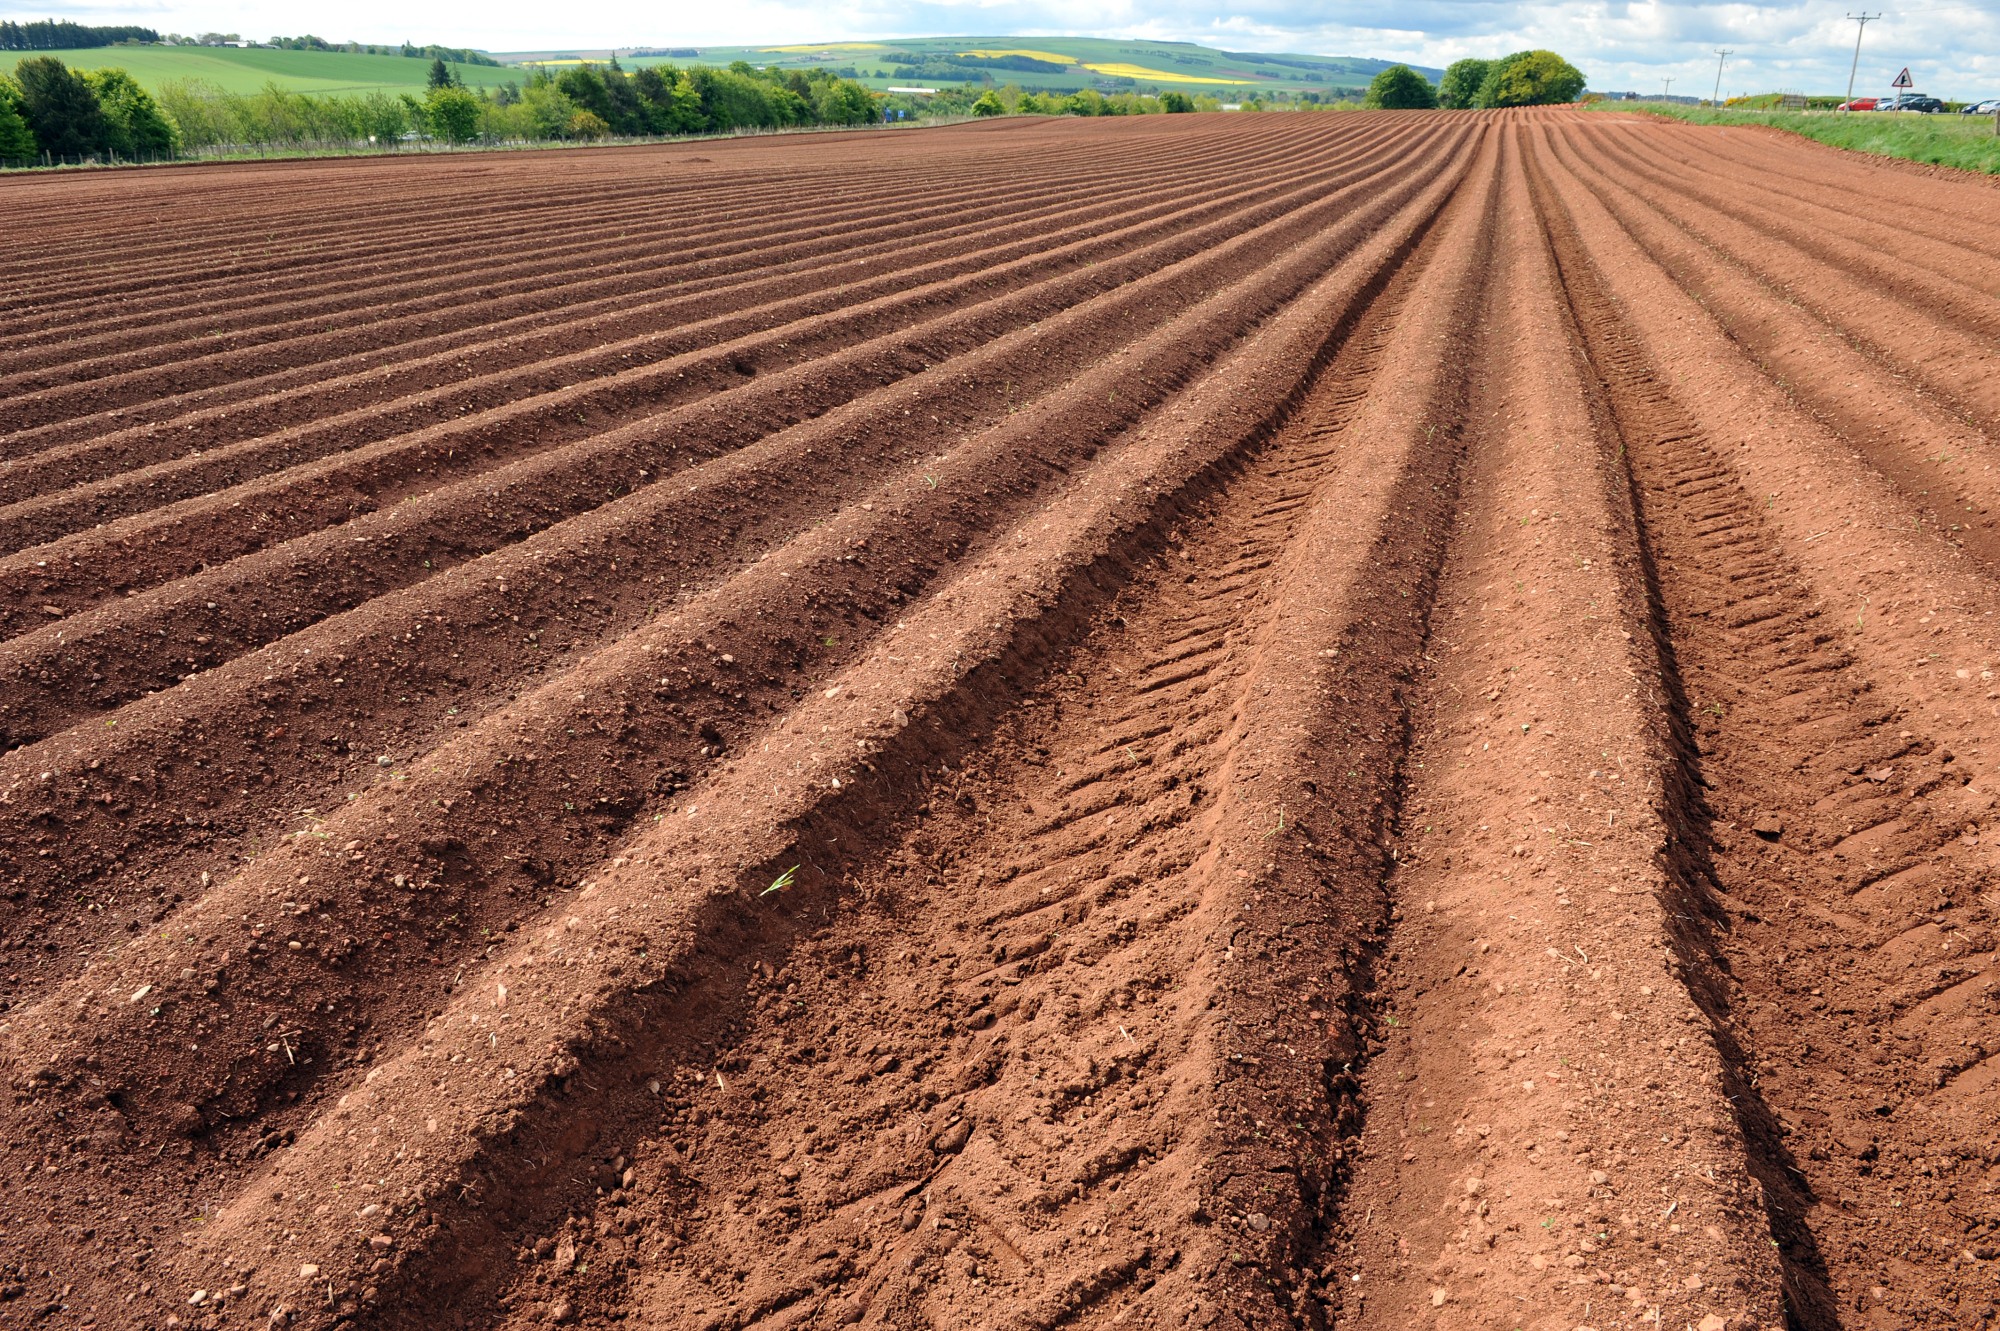 Soil furrows in an agricultural field